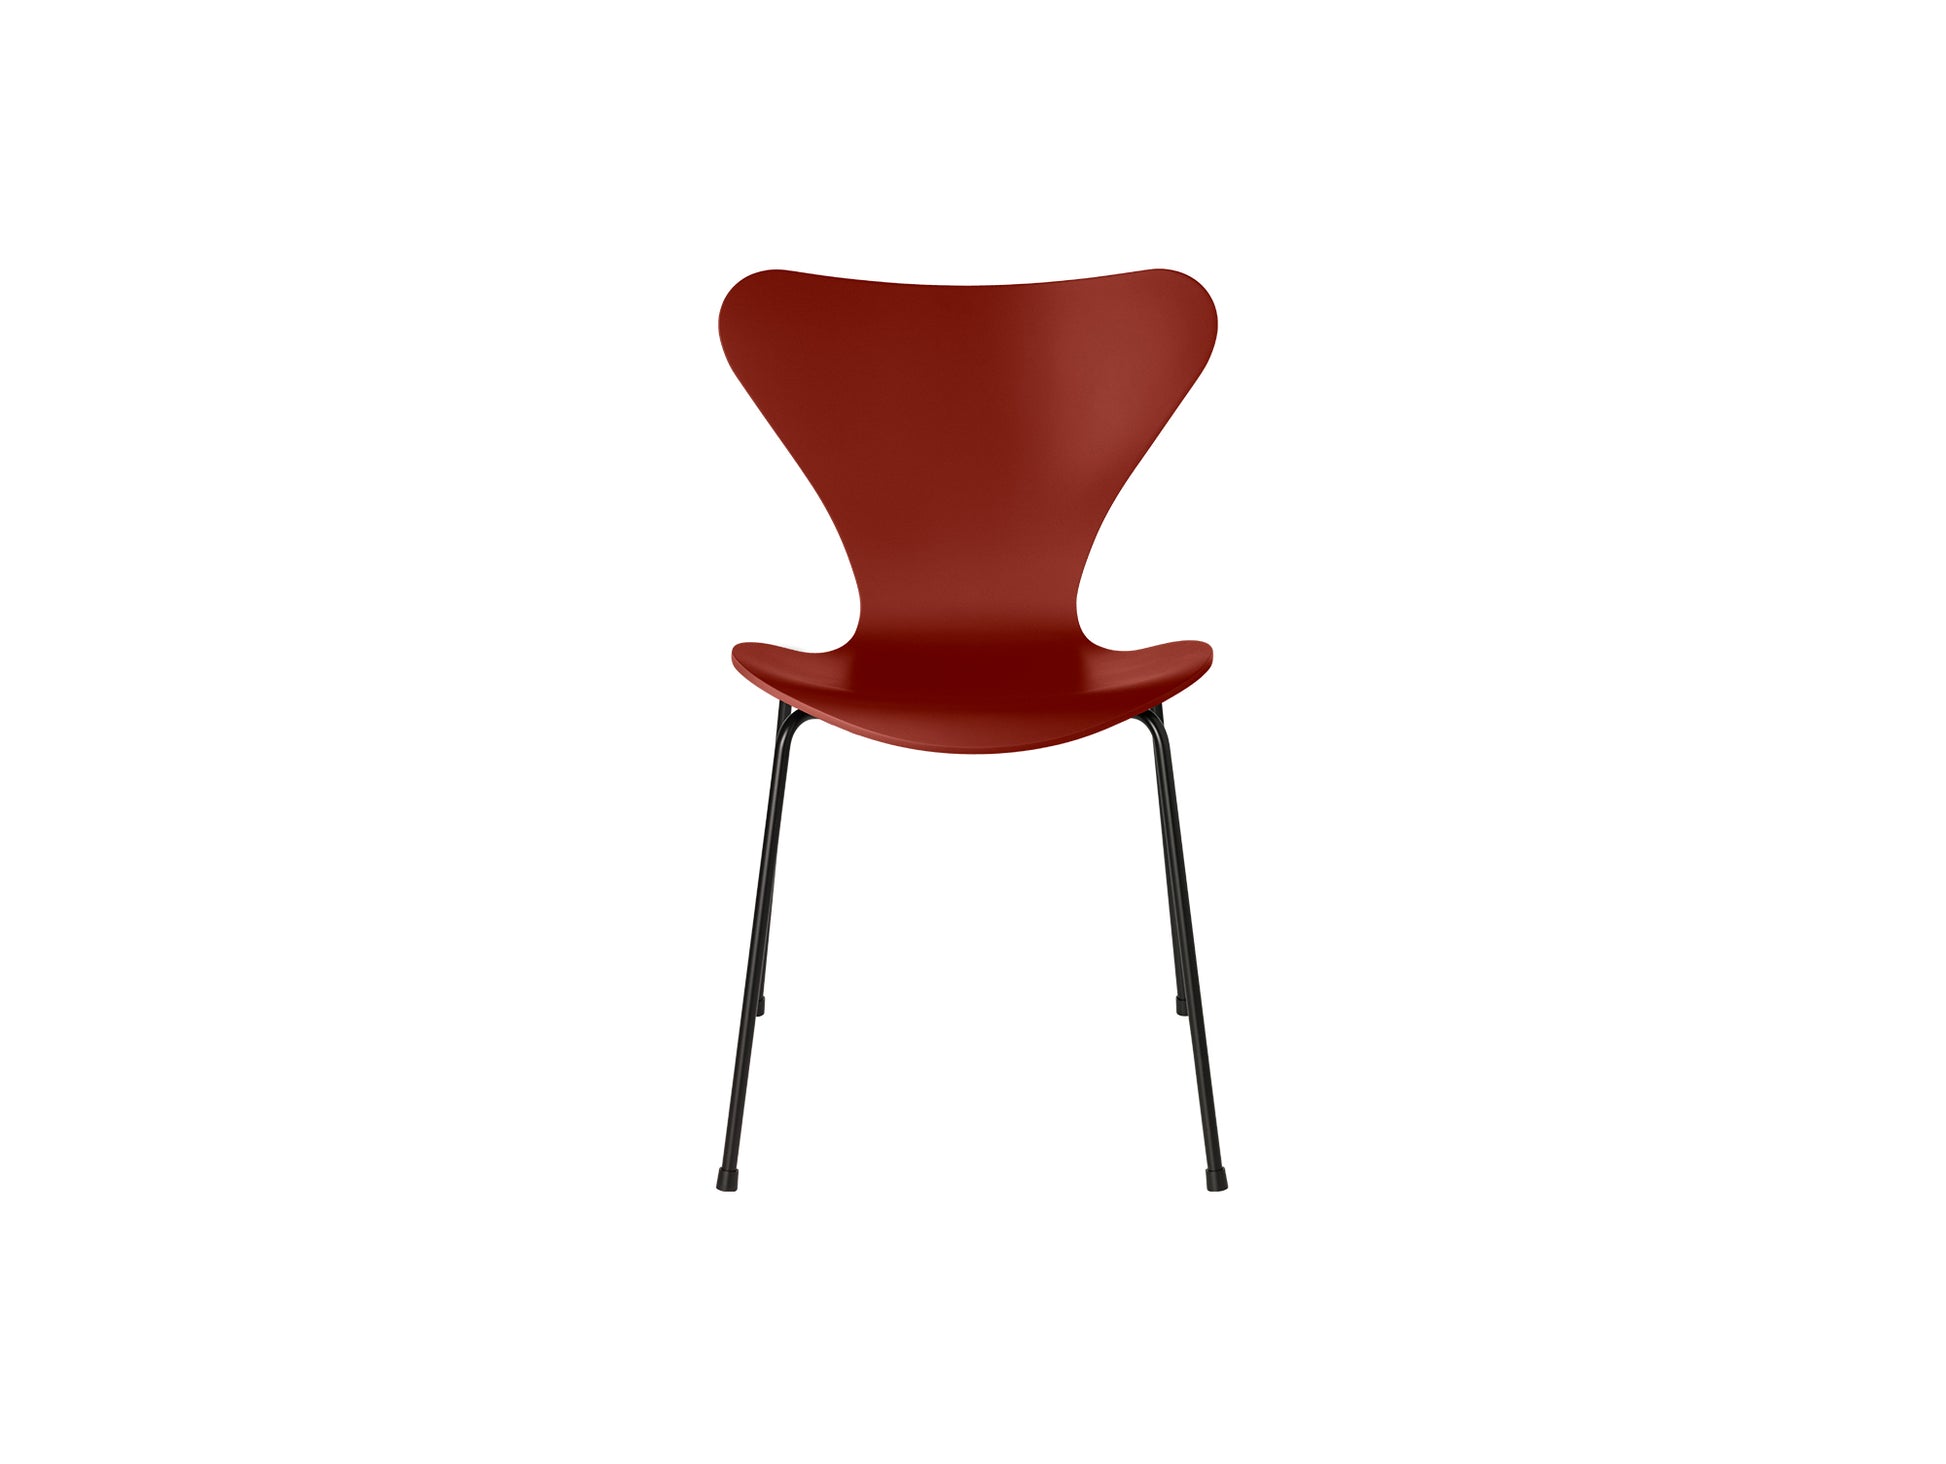 Series 7™ 3107 Dining Chair by Fritz Hansen - Venetian Red Lacquered Veneer Shell / Black Steel